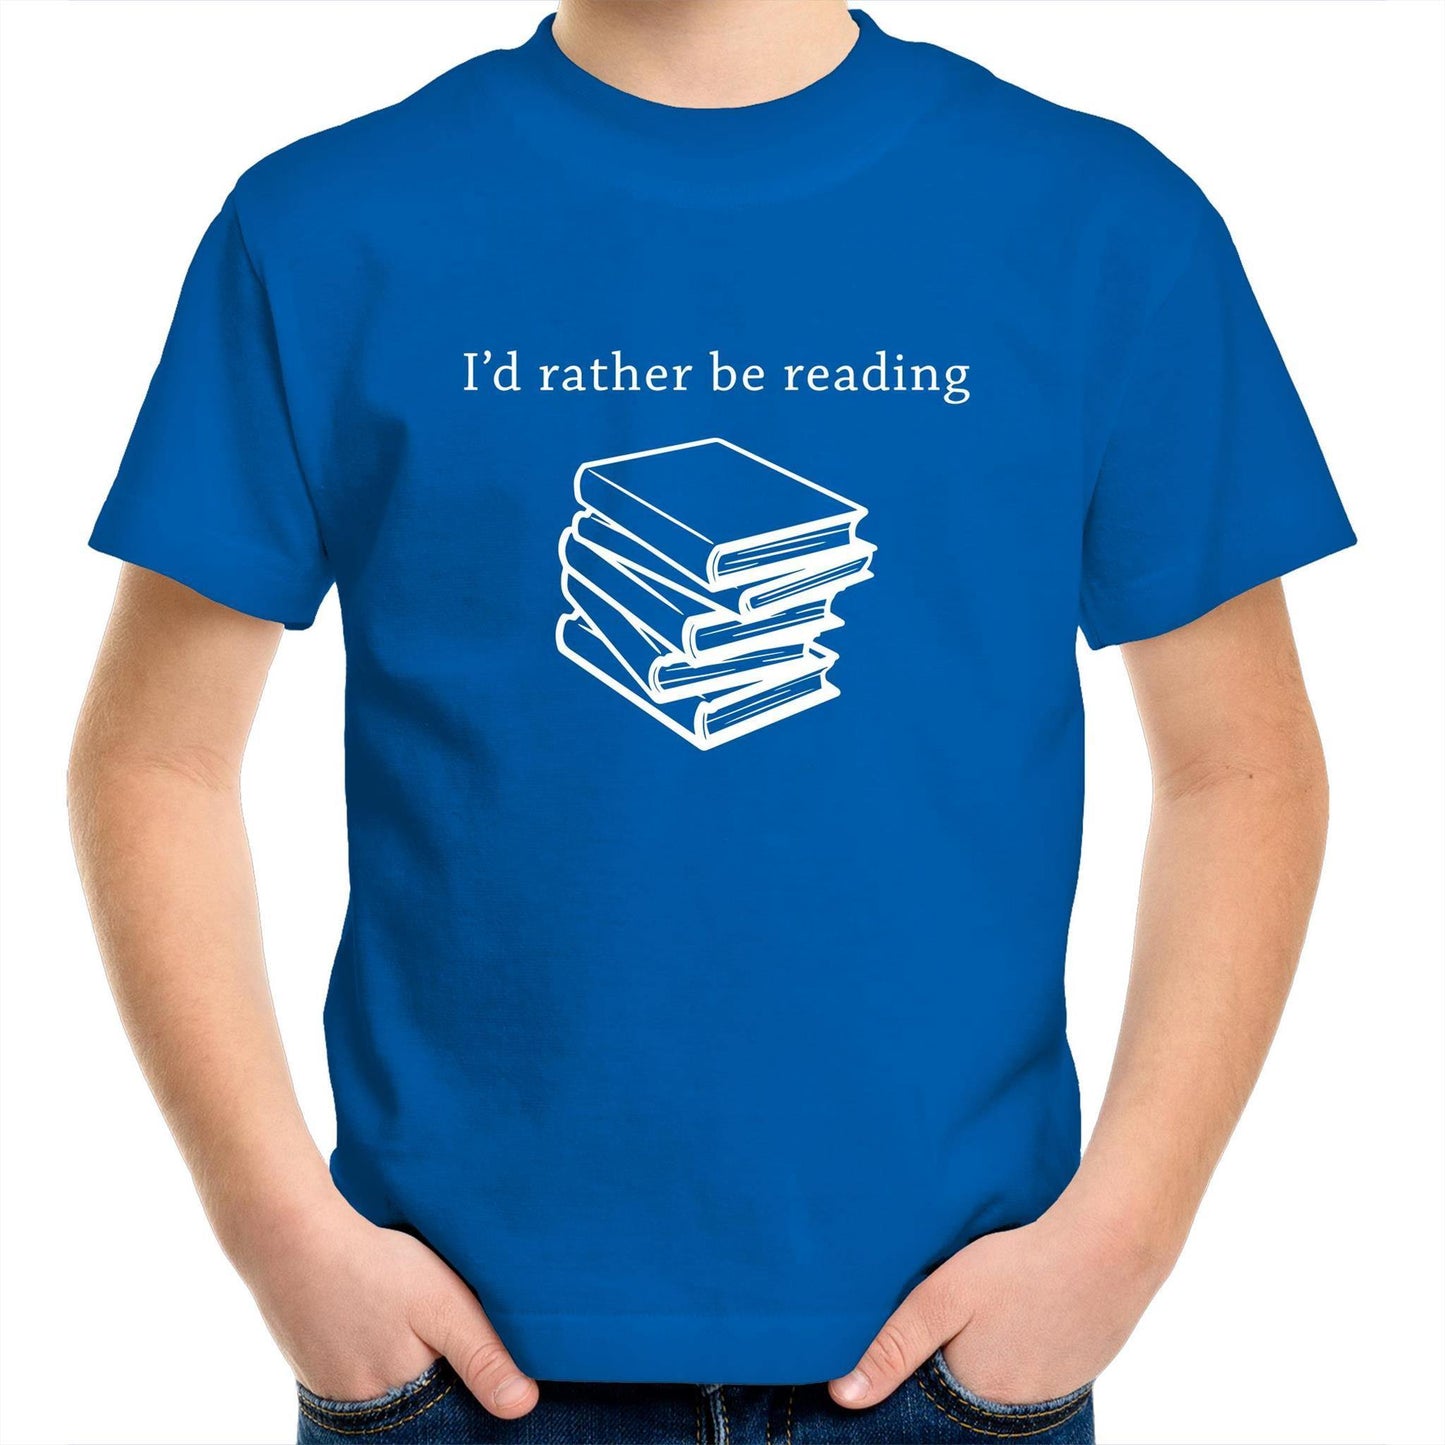 I'd Rather Be Reading - Kids Youth Crew T-Shirt Bright Royal Kids Youth T-shirt Funny